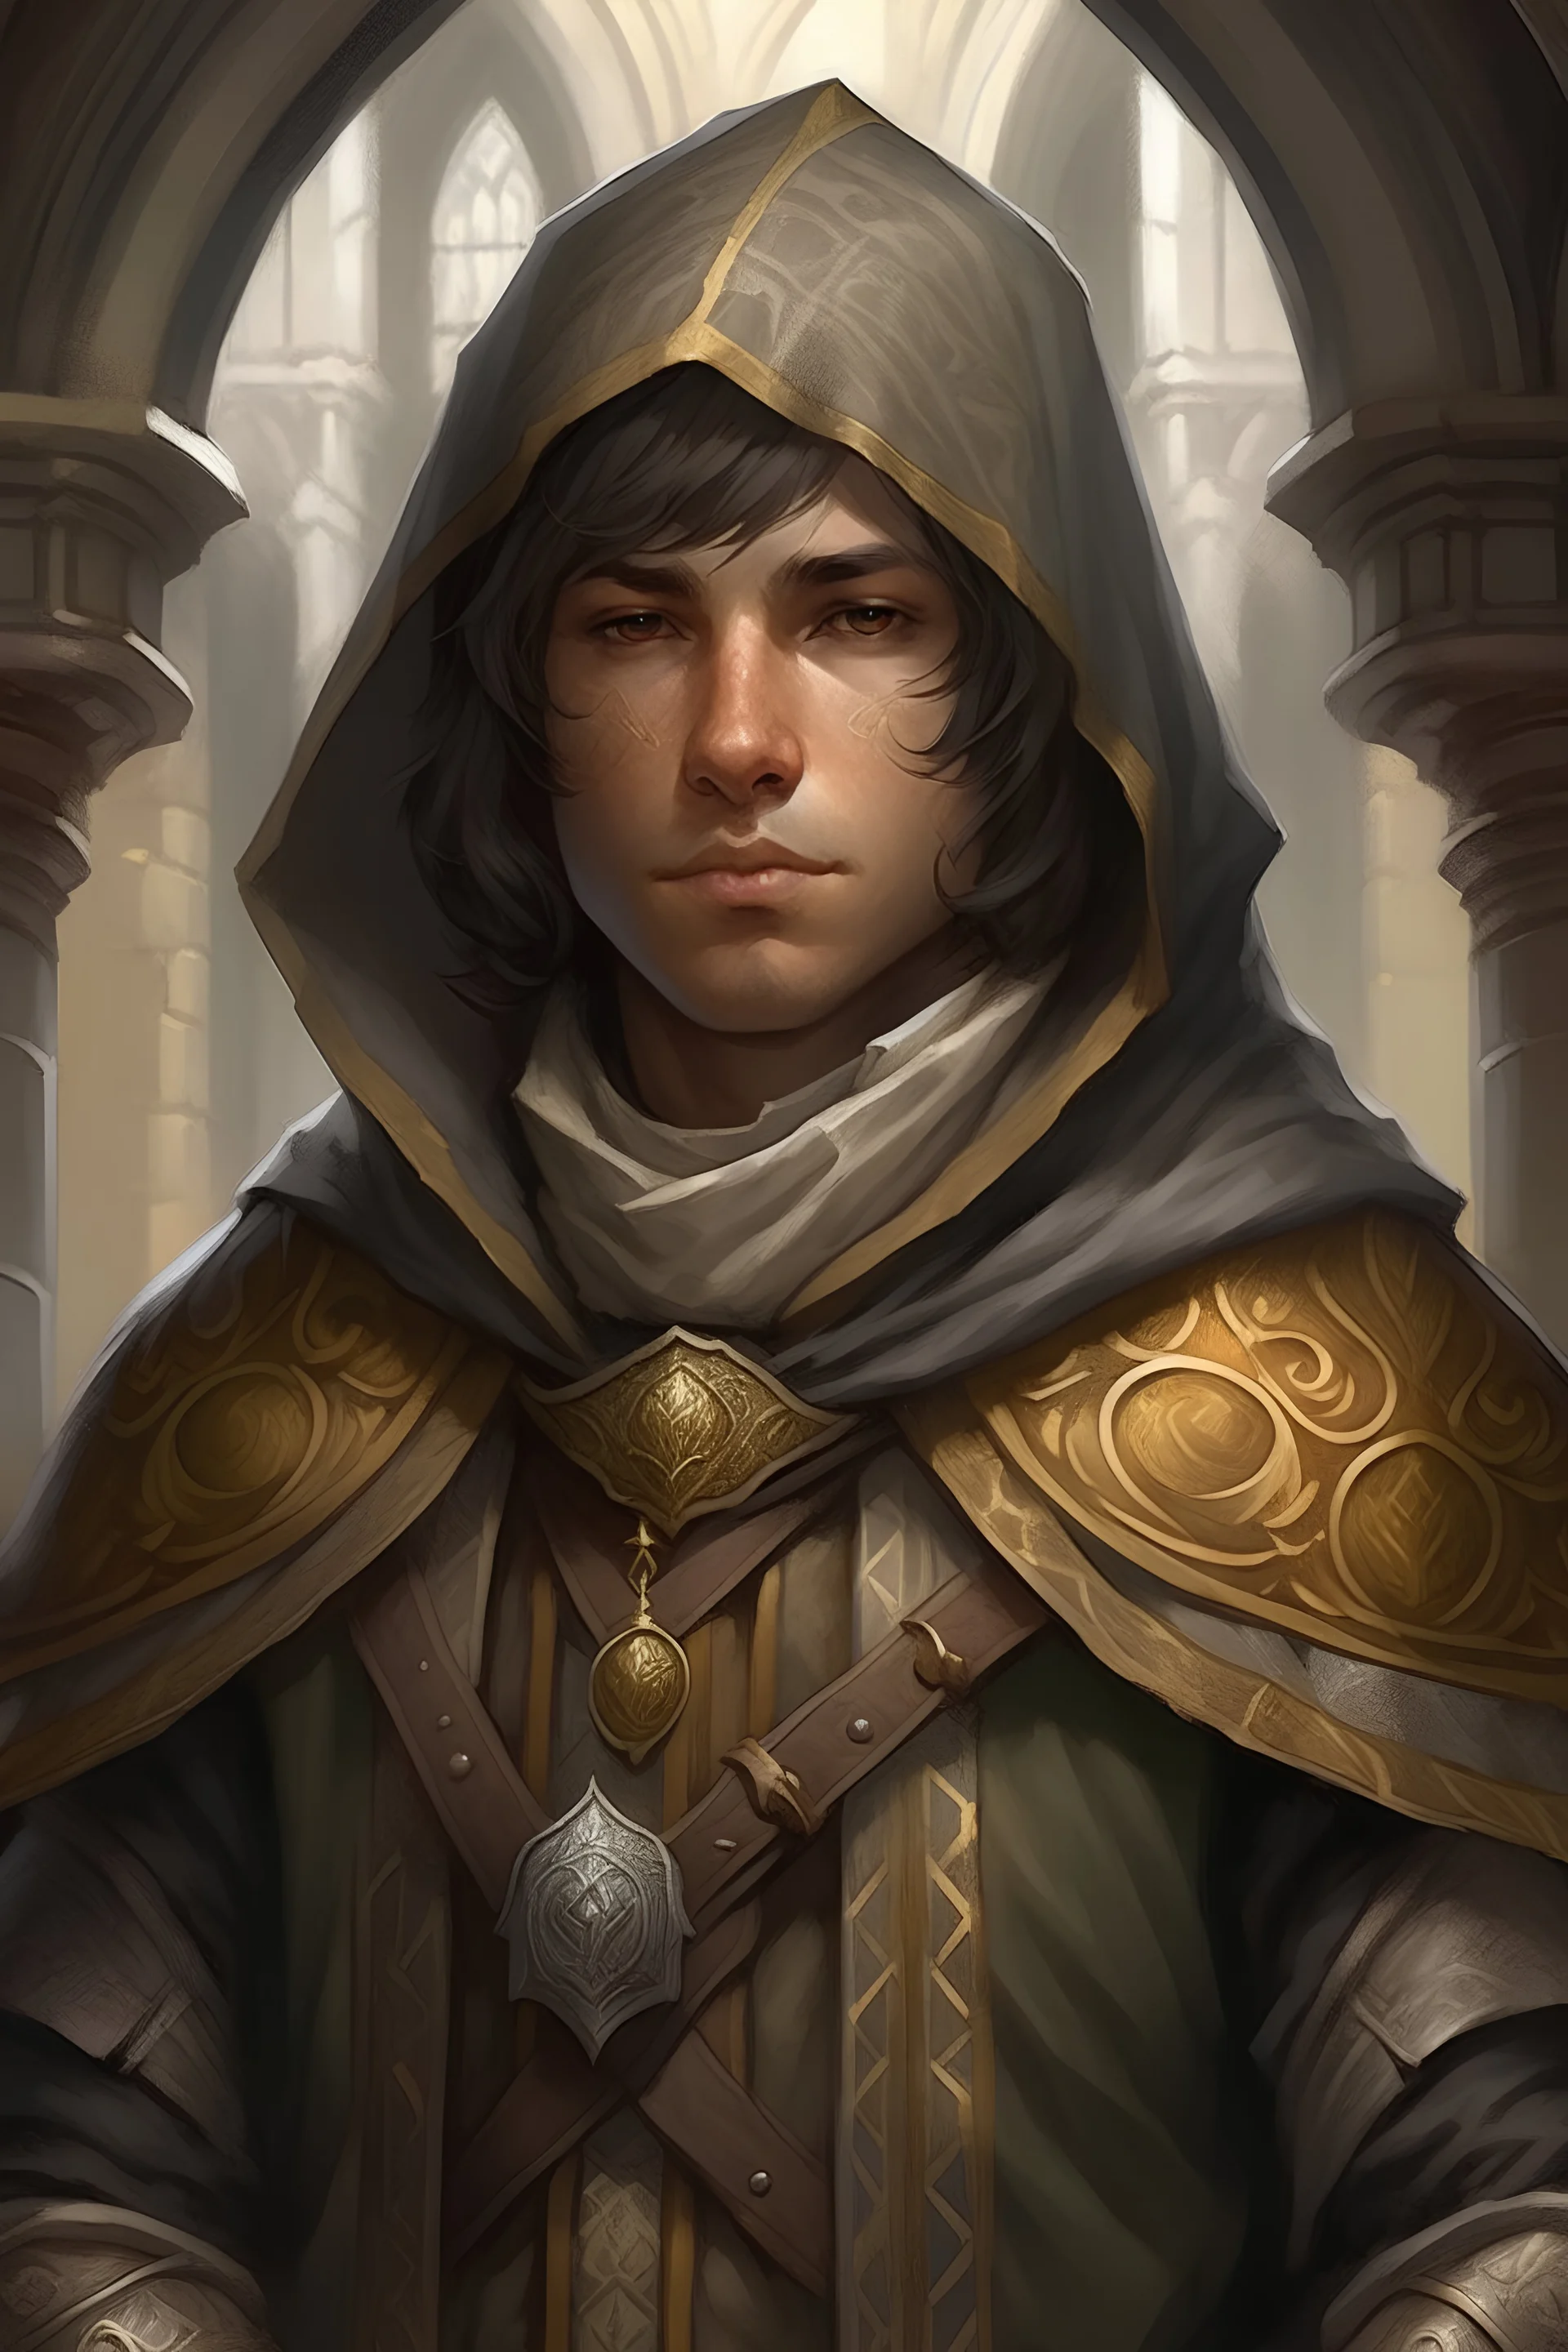 portrait of a youngman kind, cleric of lathander,with armor and a hood, temple in the background, in baldur's gate style